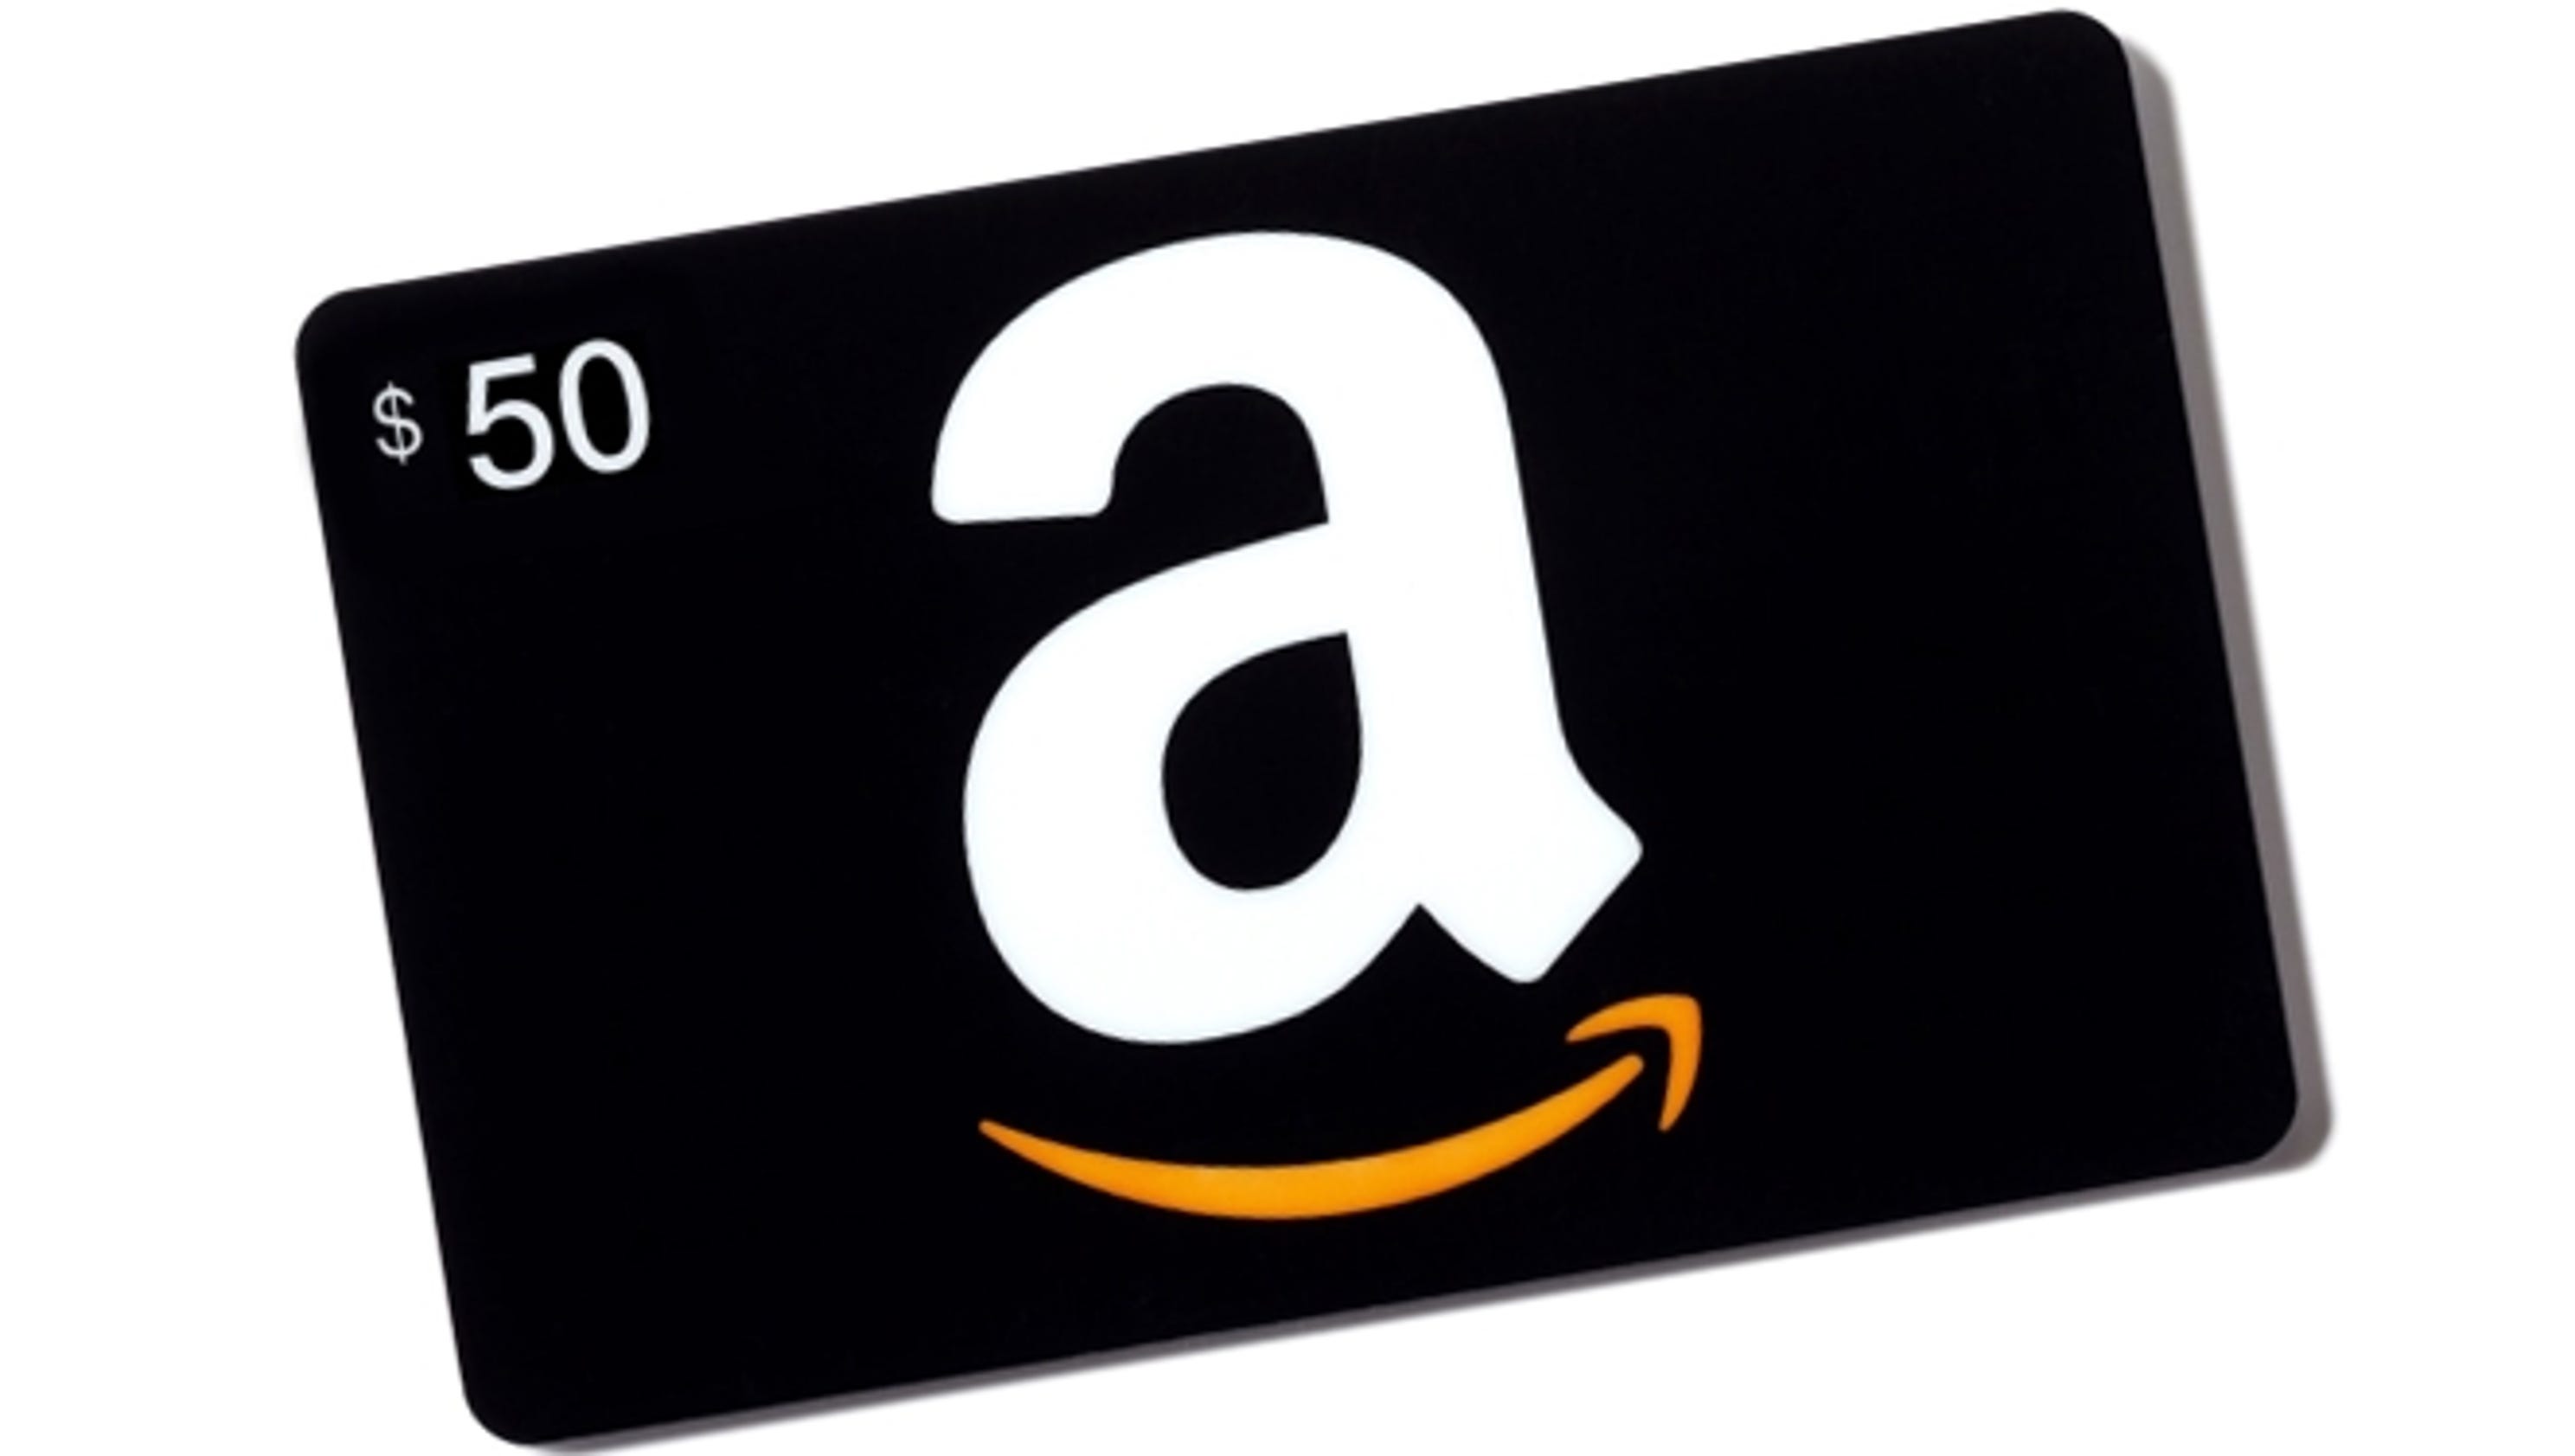 50 Amazon Gift Card was awarded to one lucky Insider member!